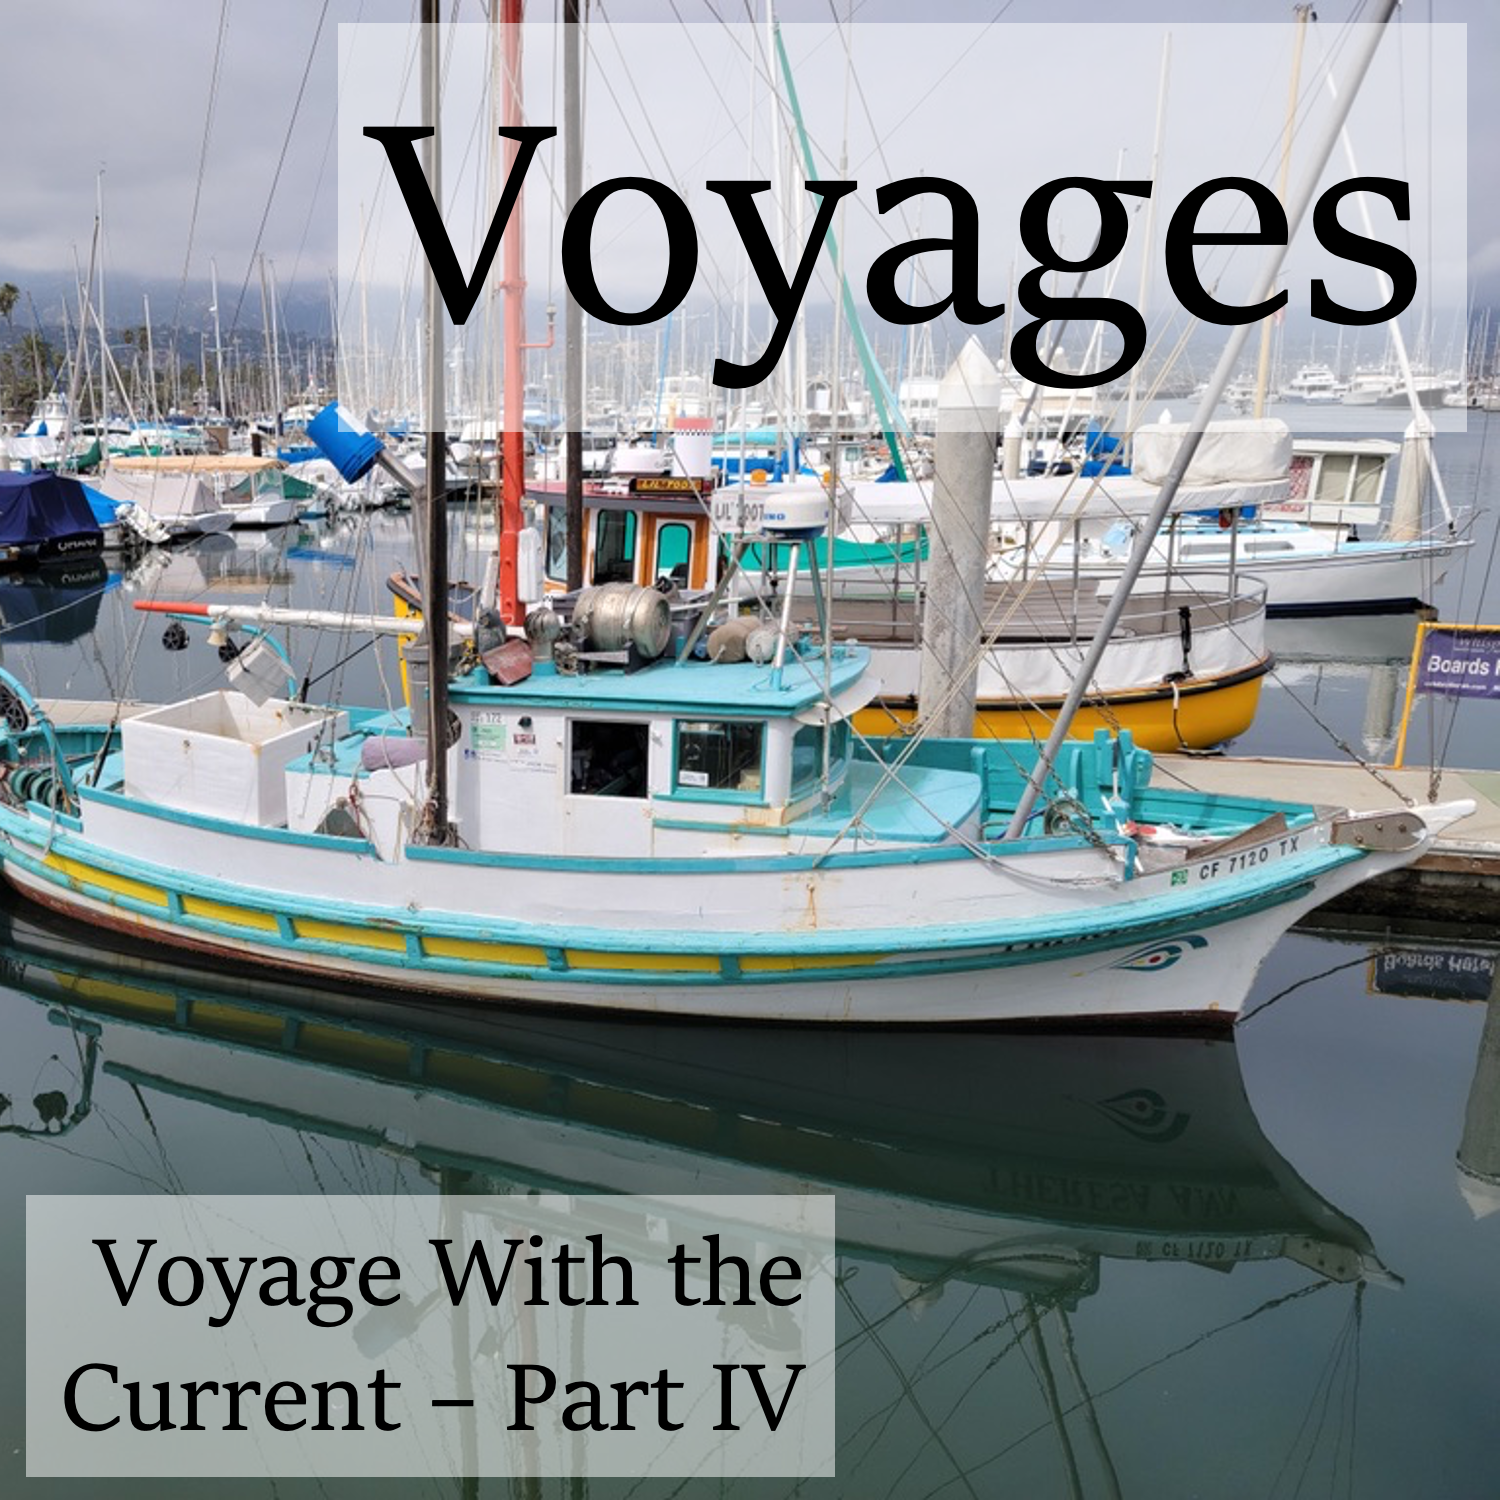 Voyage With the Current - Part IV